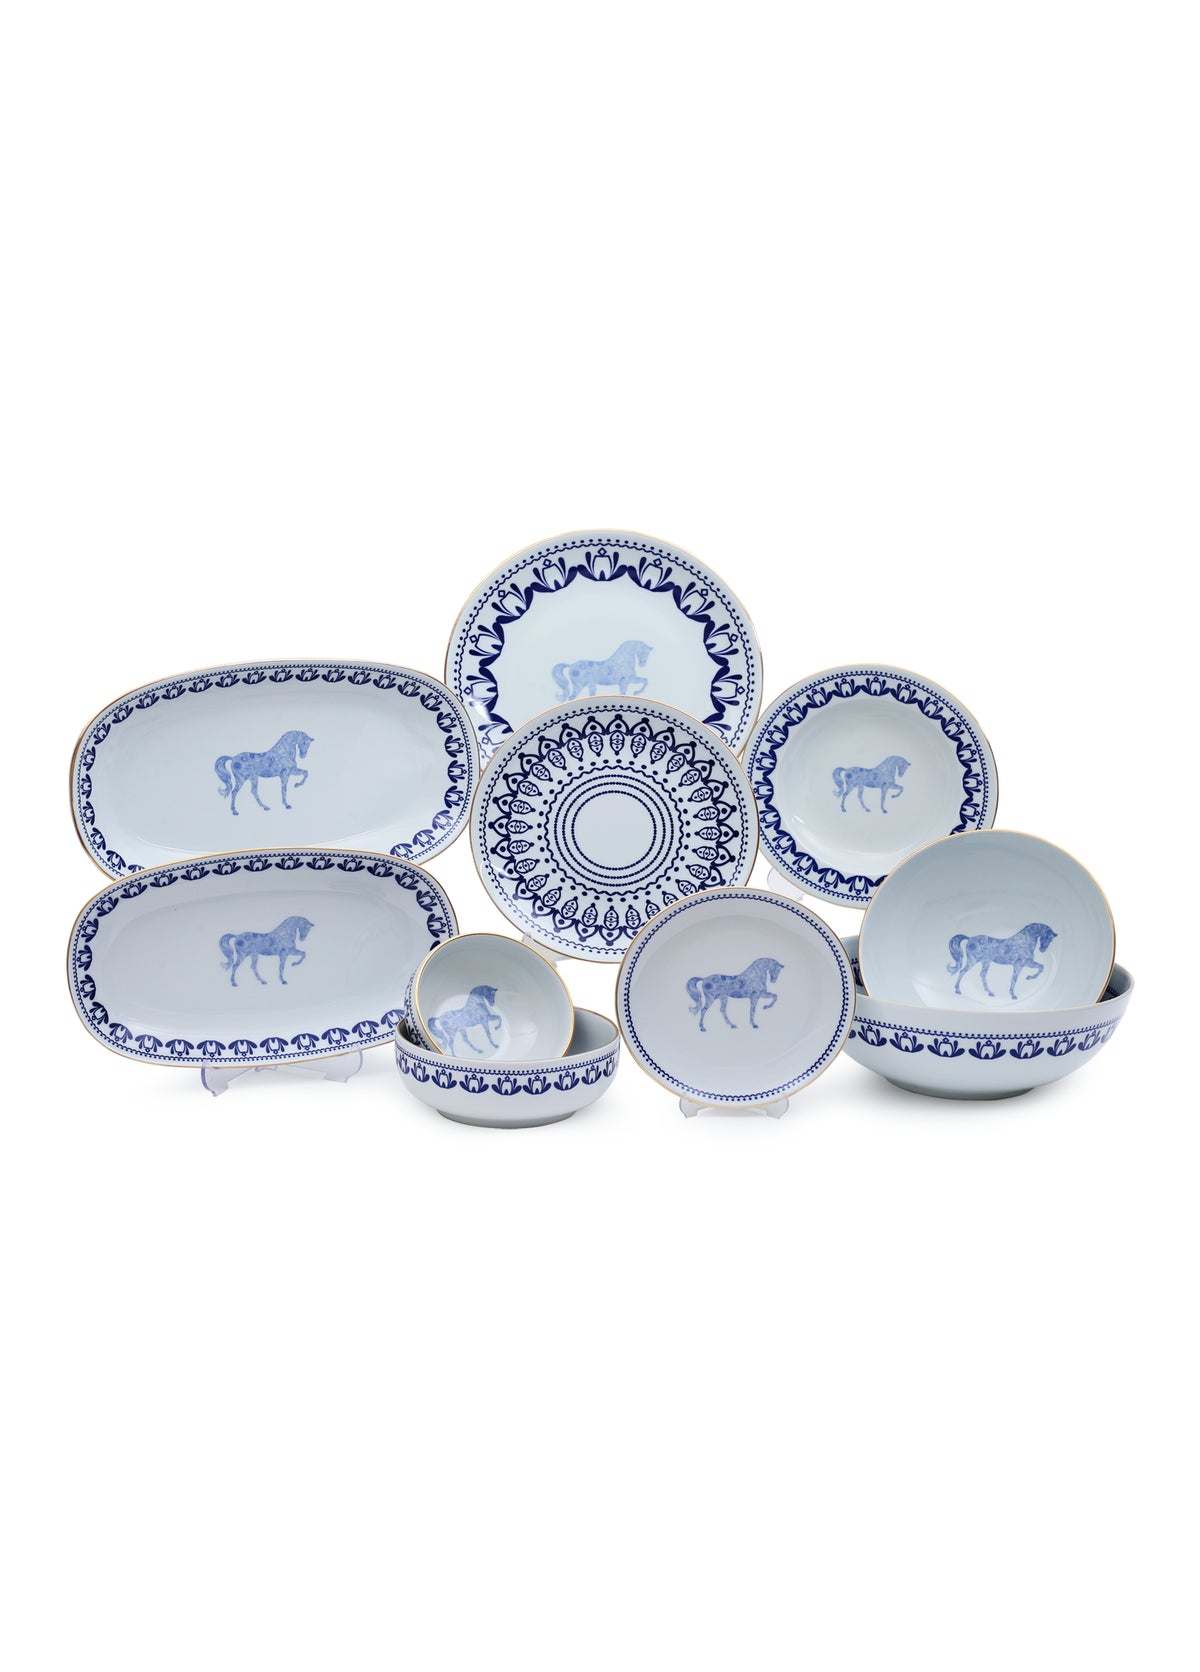 Horse Luck Collection-Blue Set of 12 Plates (82 pieces)